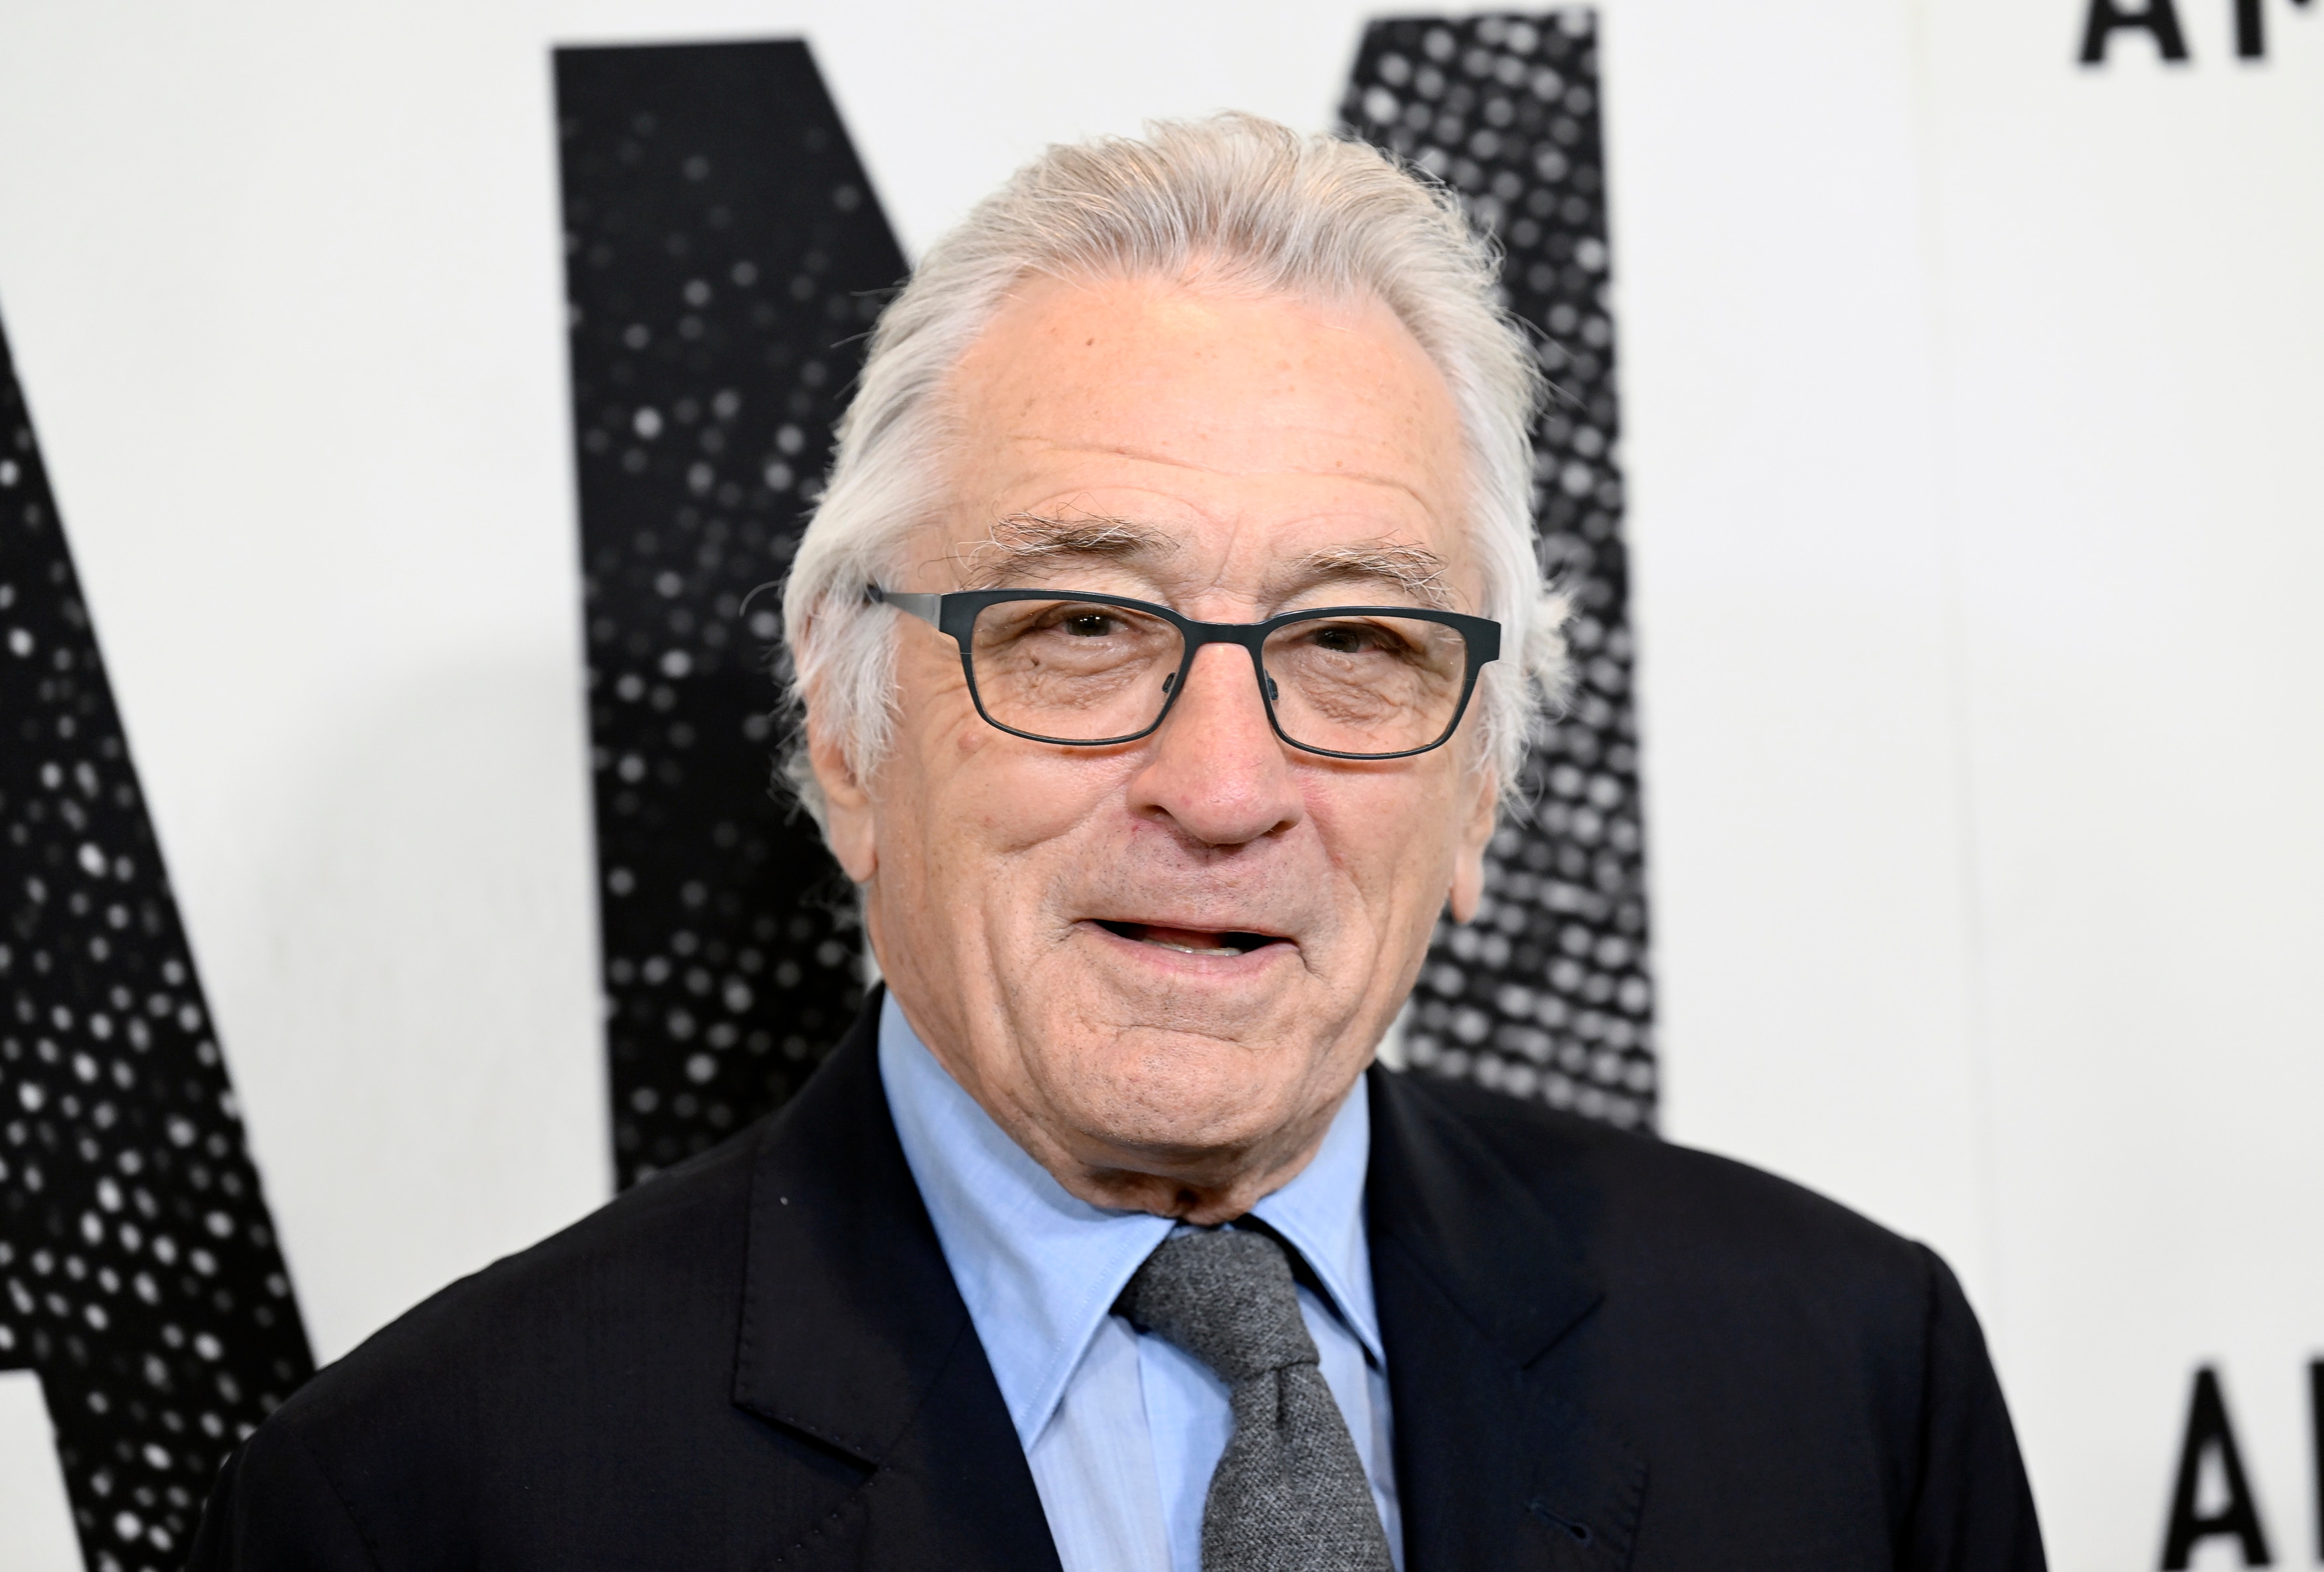 Robert DeNiro Becomes a Father again to His Seventh Child at The Age of 79